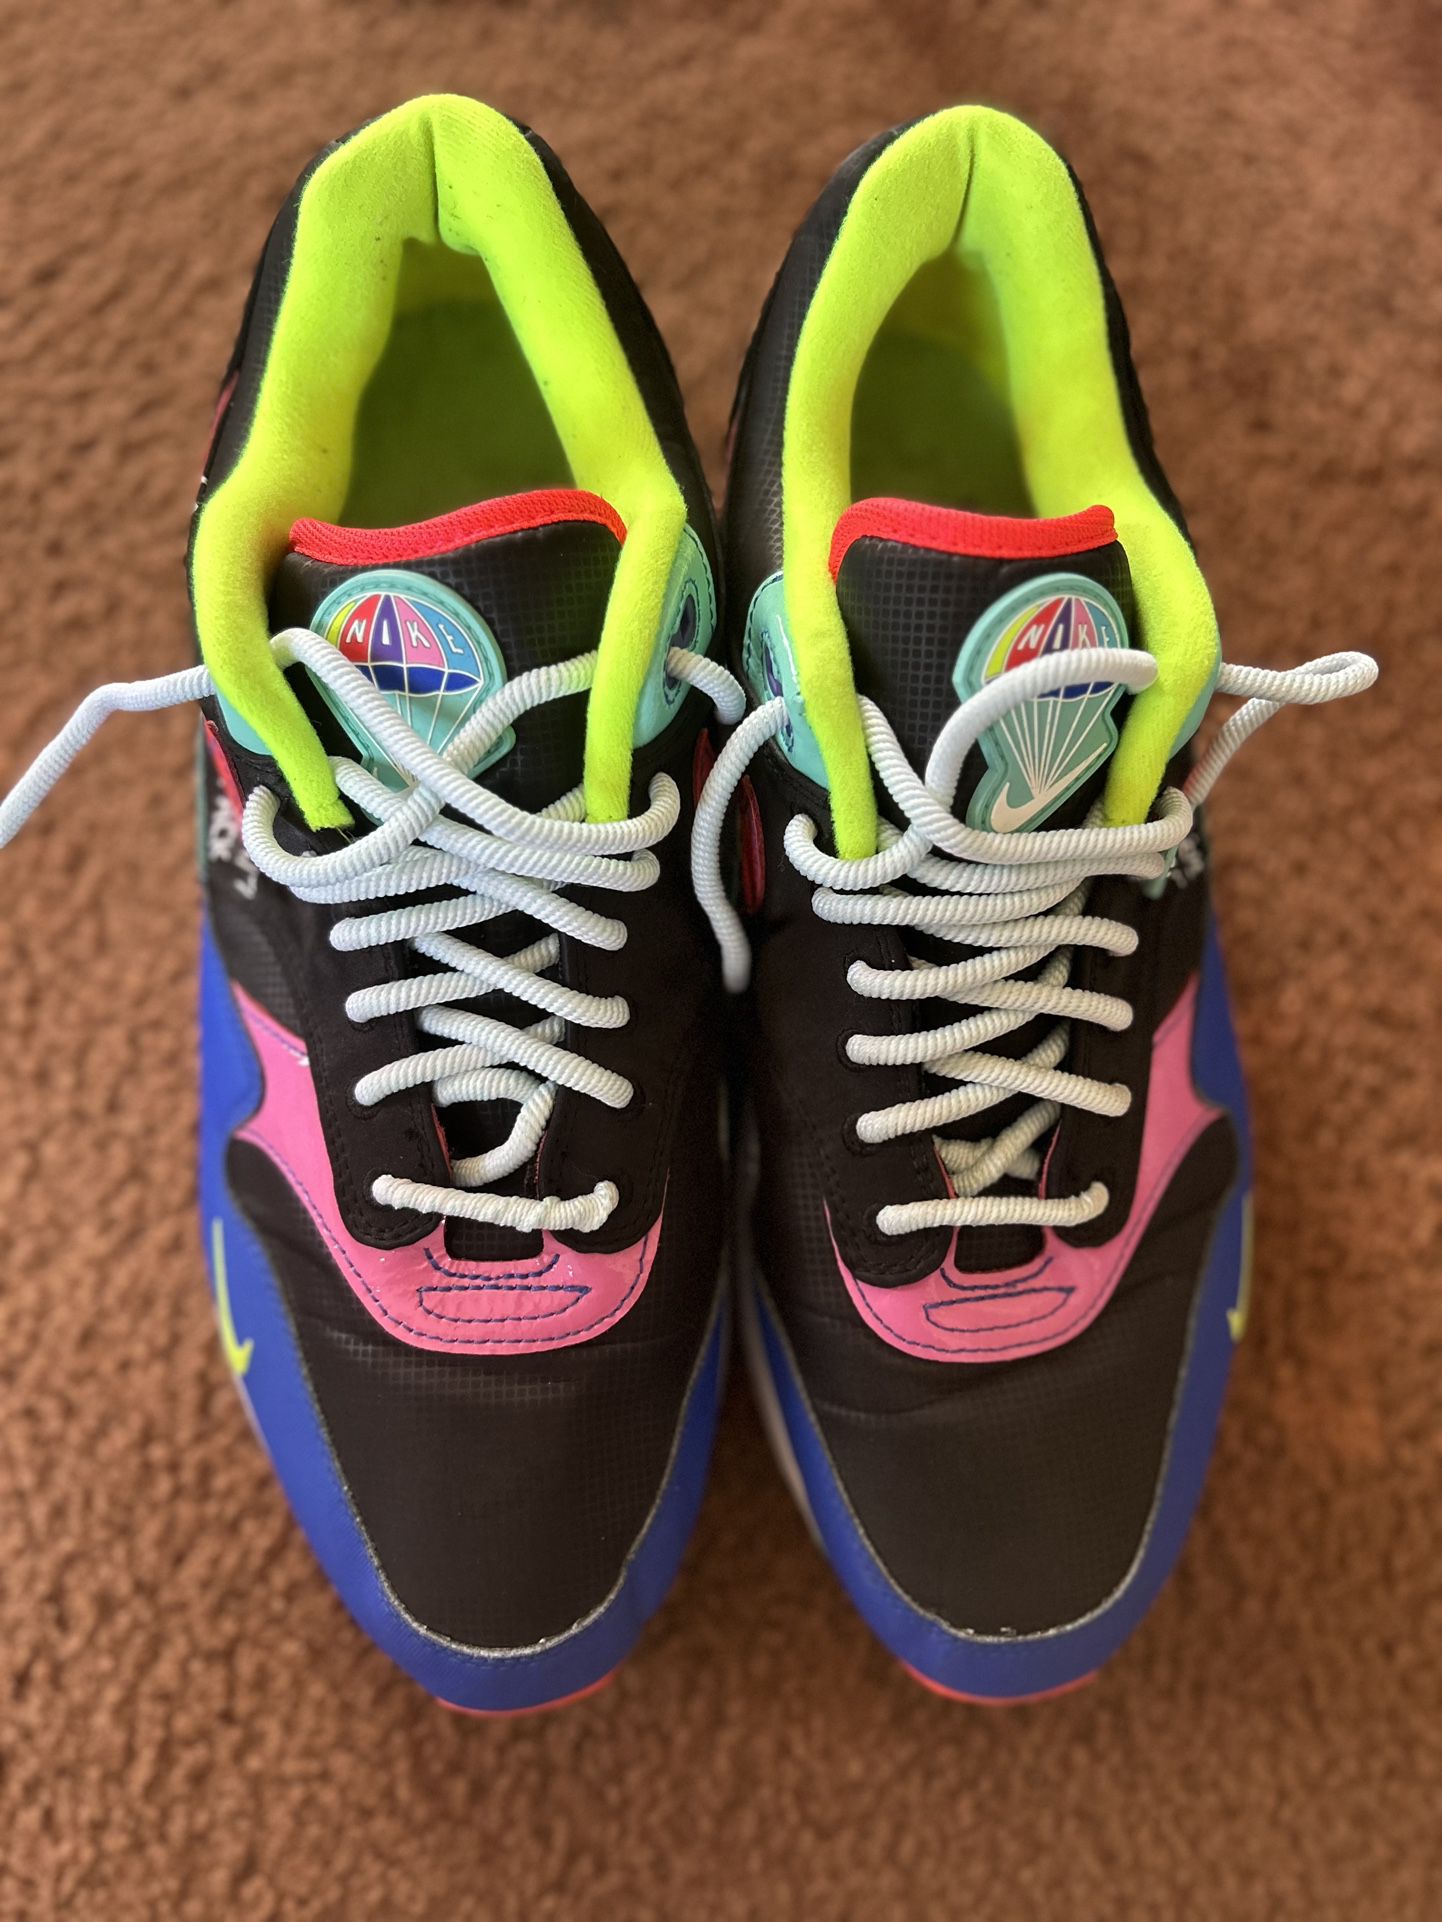 Verbanning Huisje Edele Nike Air Max 1 "Parachute" $90 for Sale in Long Beach, CA - OfferUp